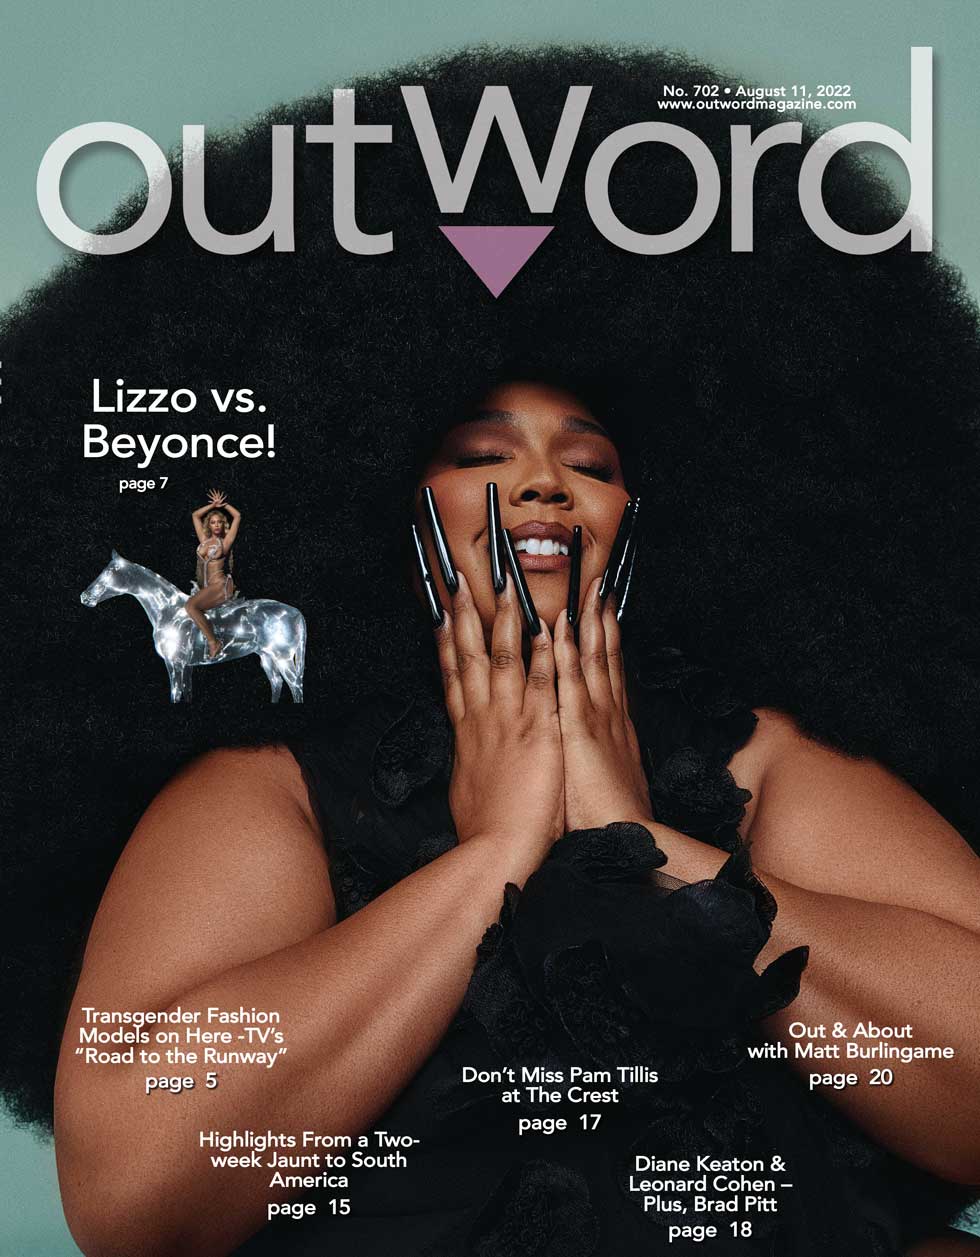 August 11, 2022 | The New Issue of Outword is Totally Out Now!